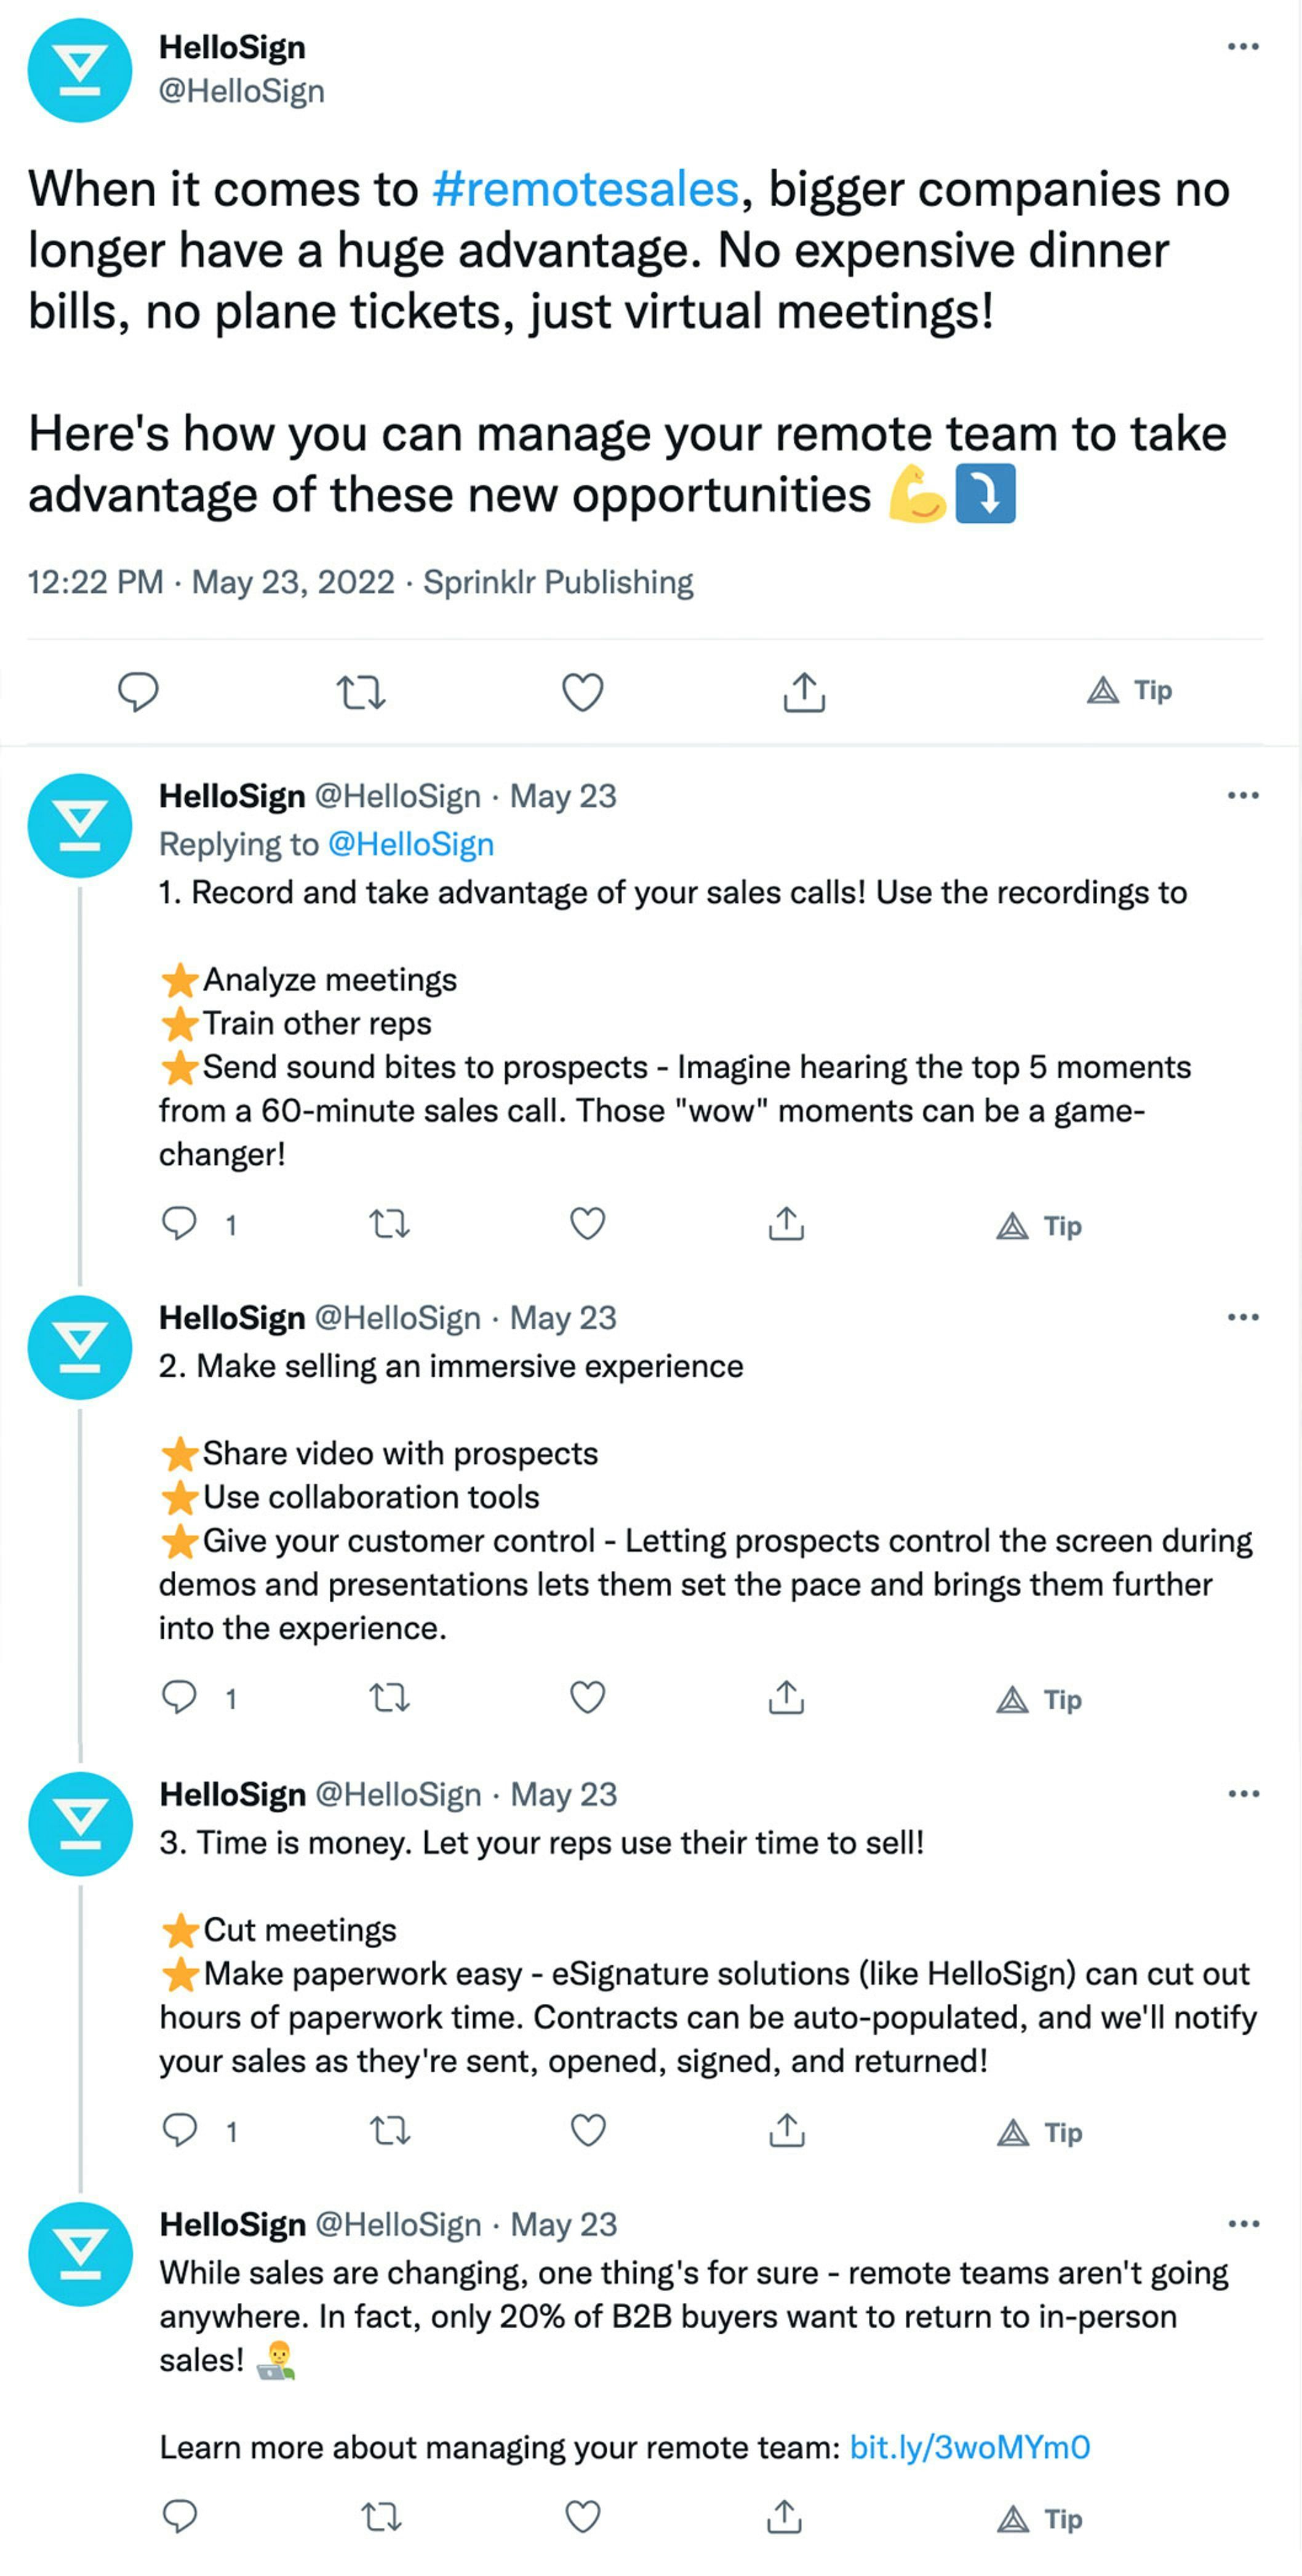 Tweet thread by HelloSign highlighting strategies for managing remote sales teams and leveraging virtual meetings over in-person interactions.